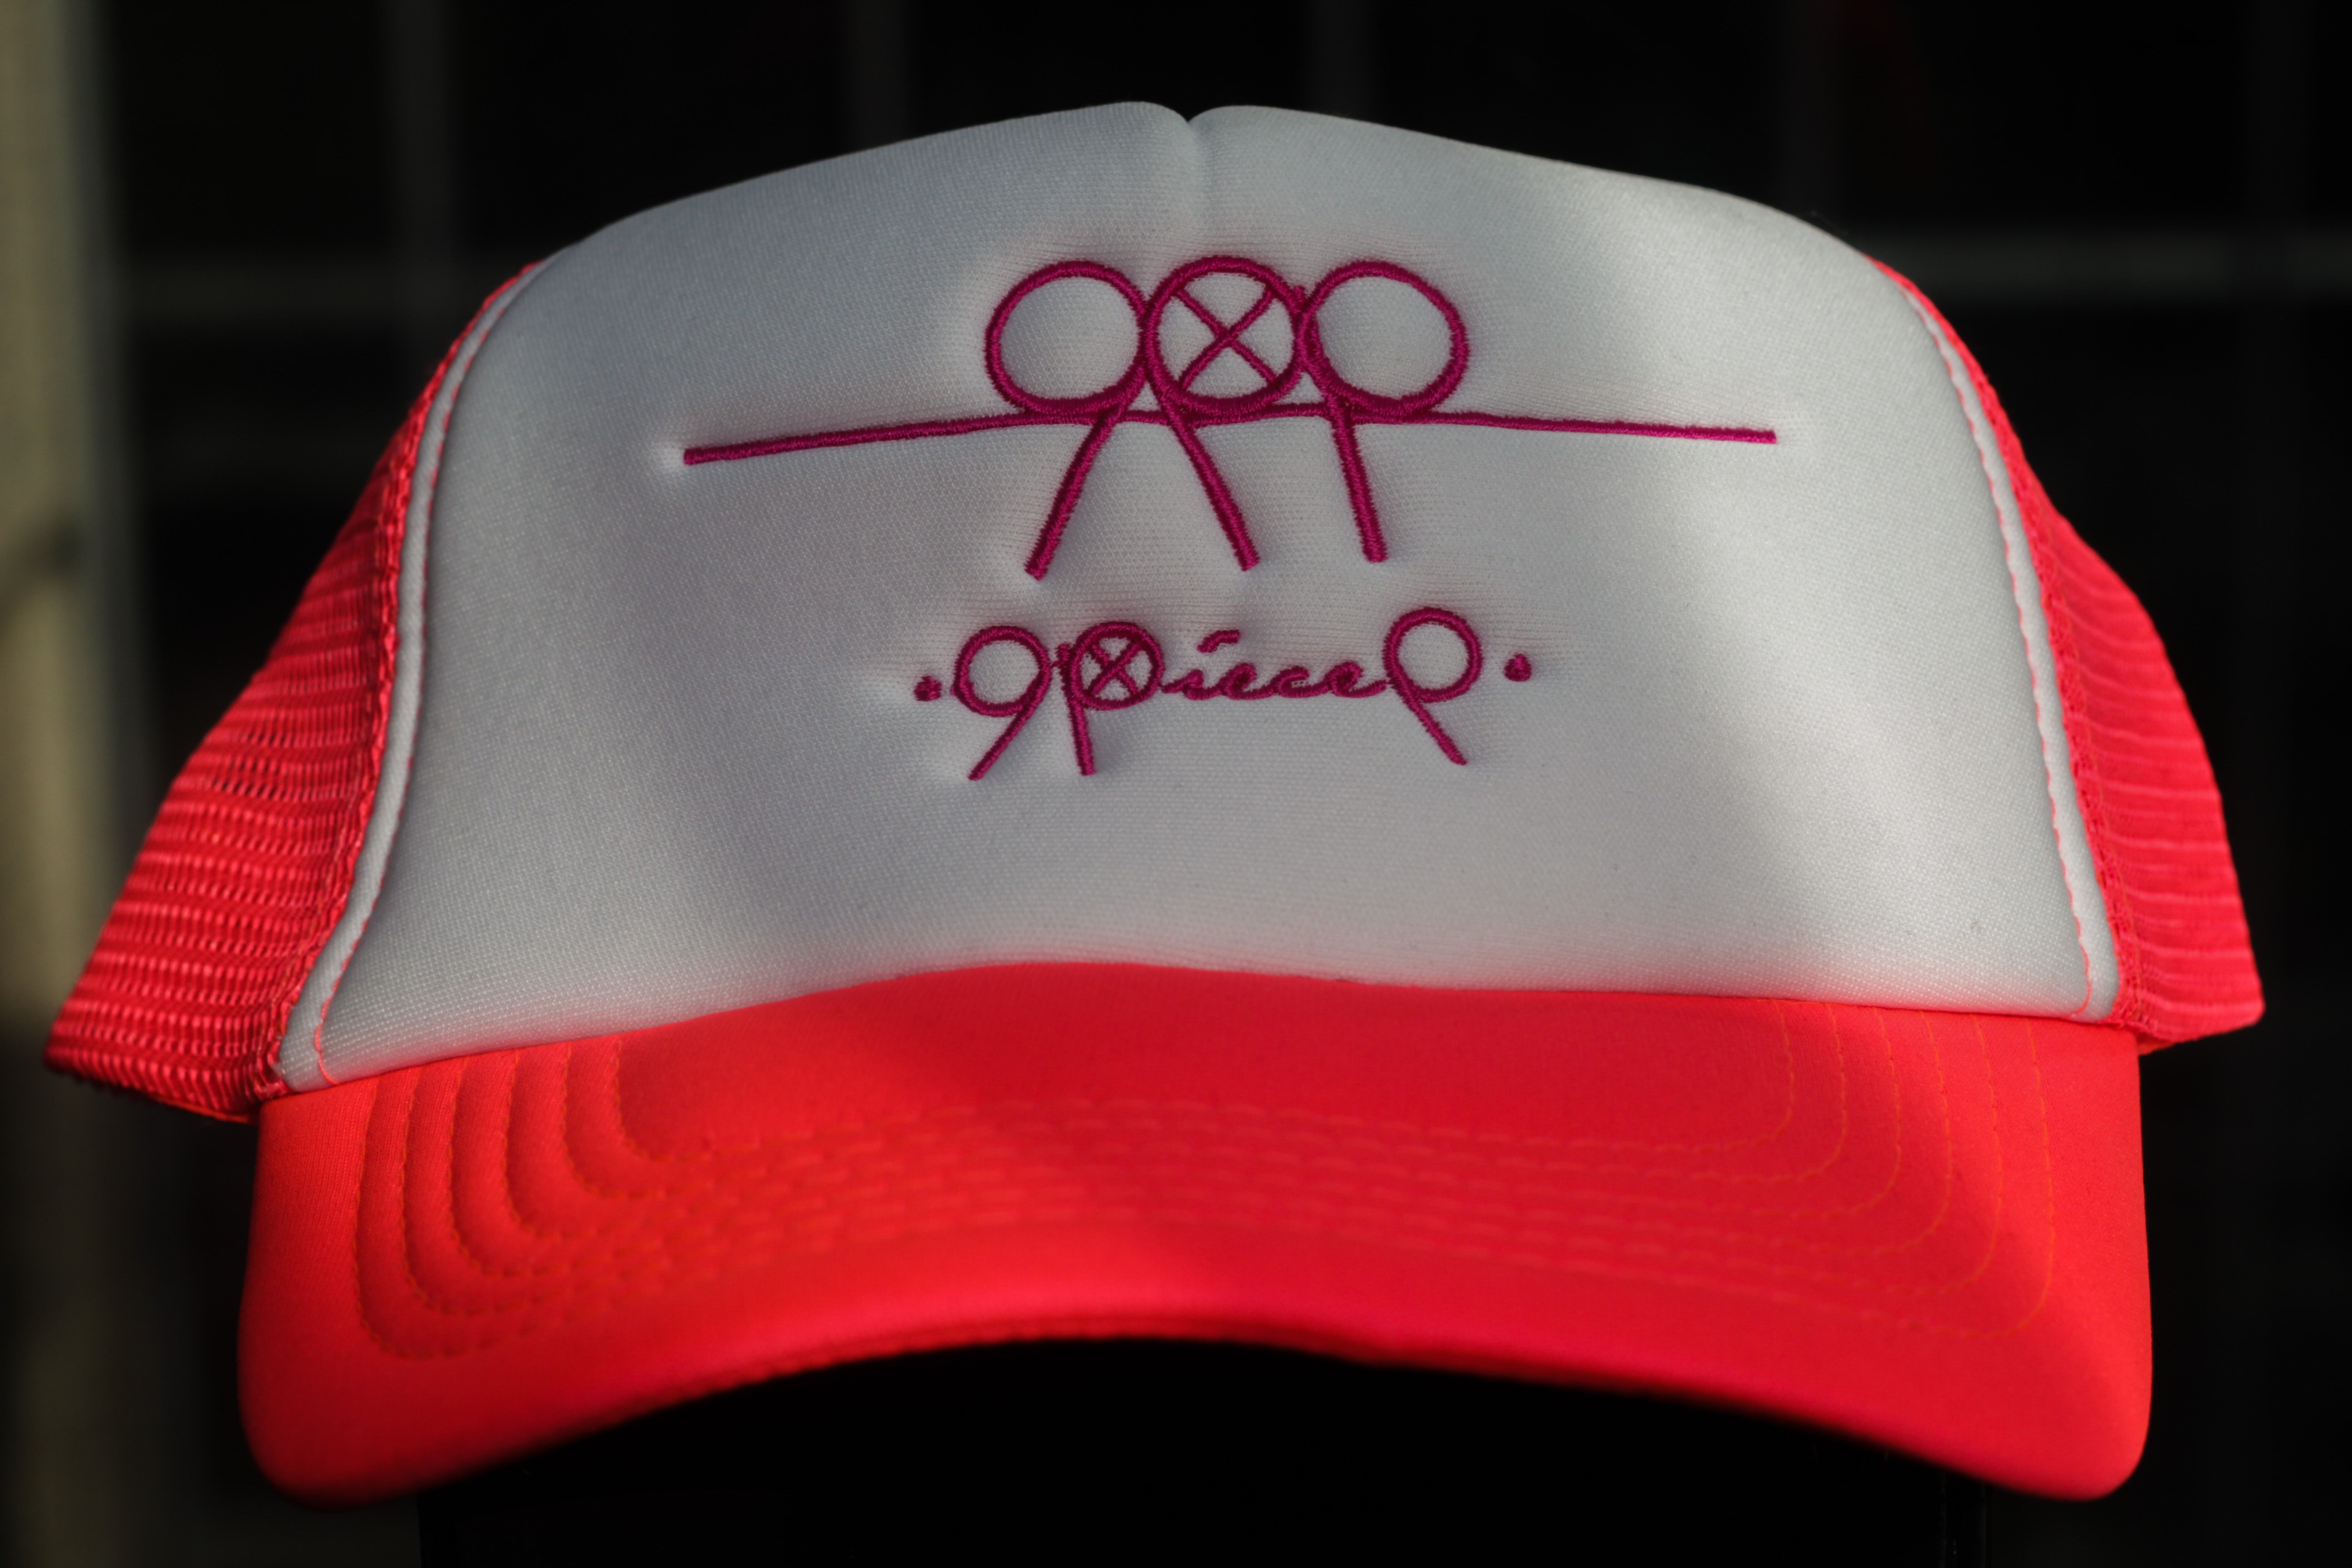 99Piece White & Pink Trucker Cap with adjustable snap.  100% Cotton (front panel and peak) & 100% Nylon mesh rear panels.